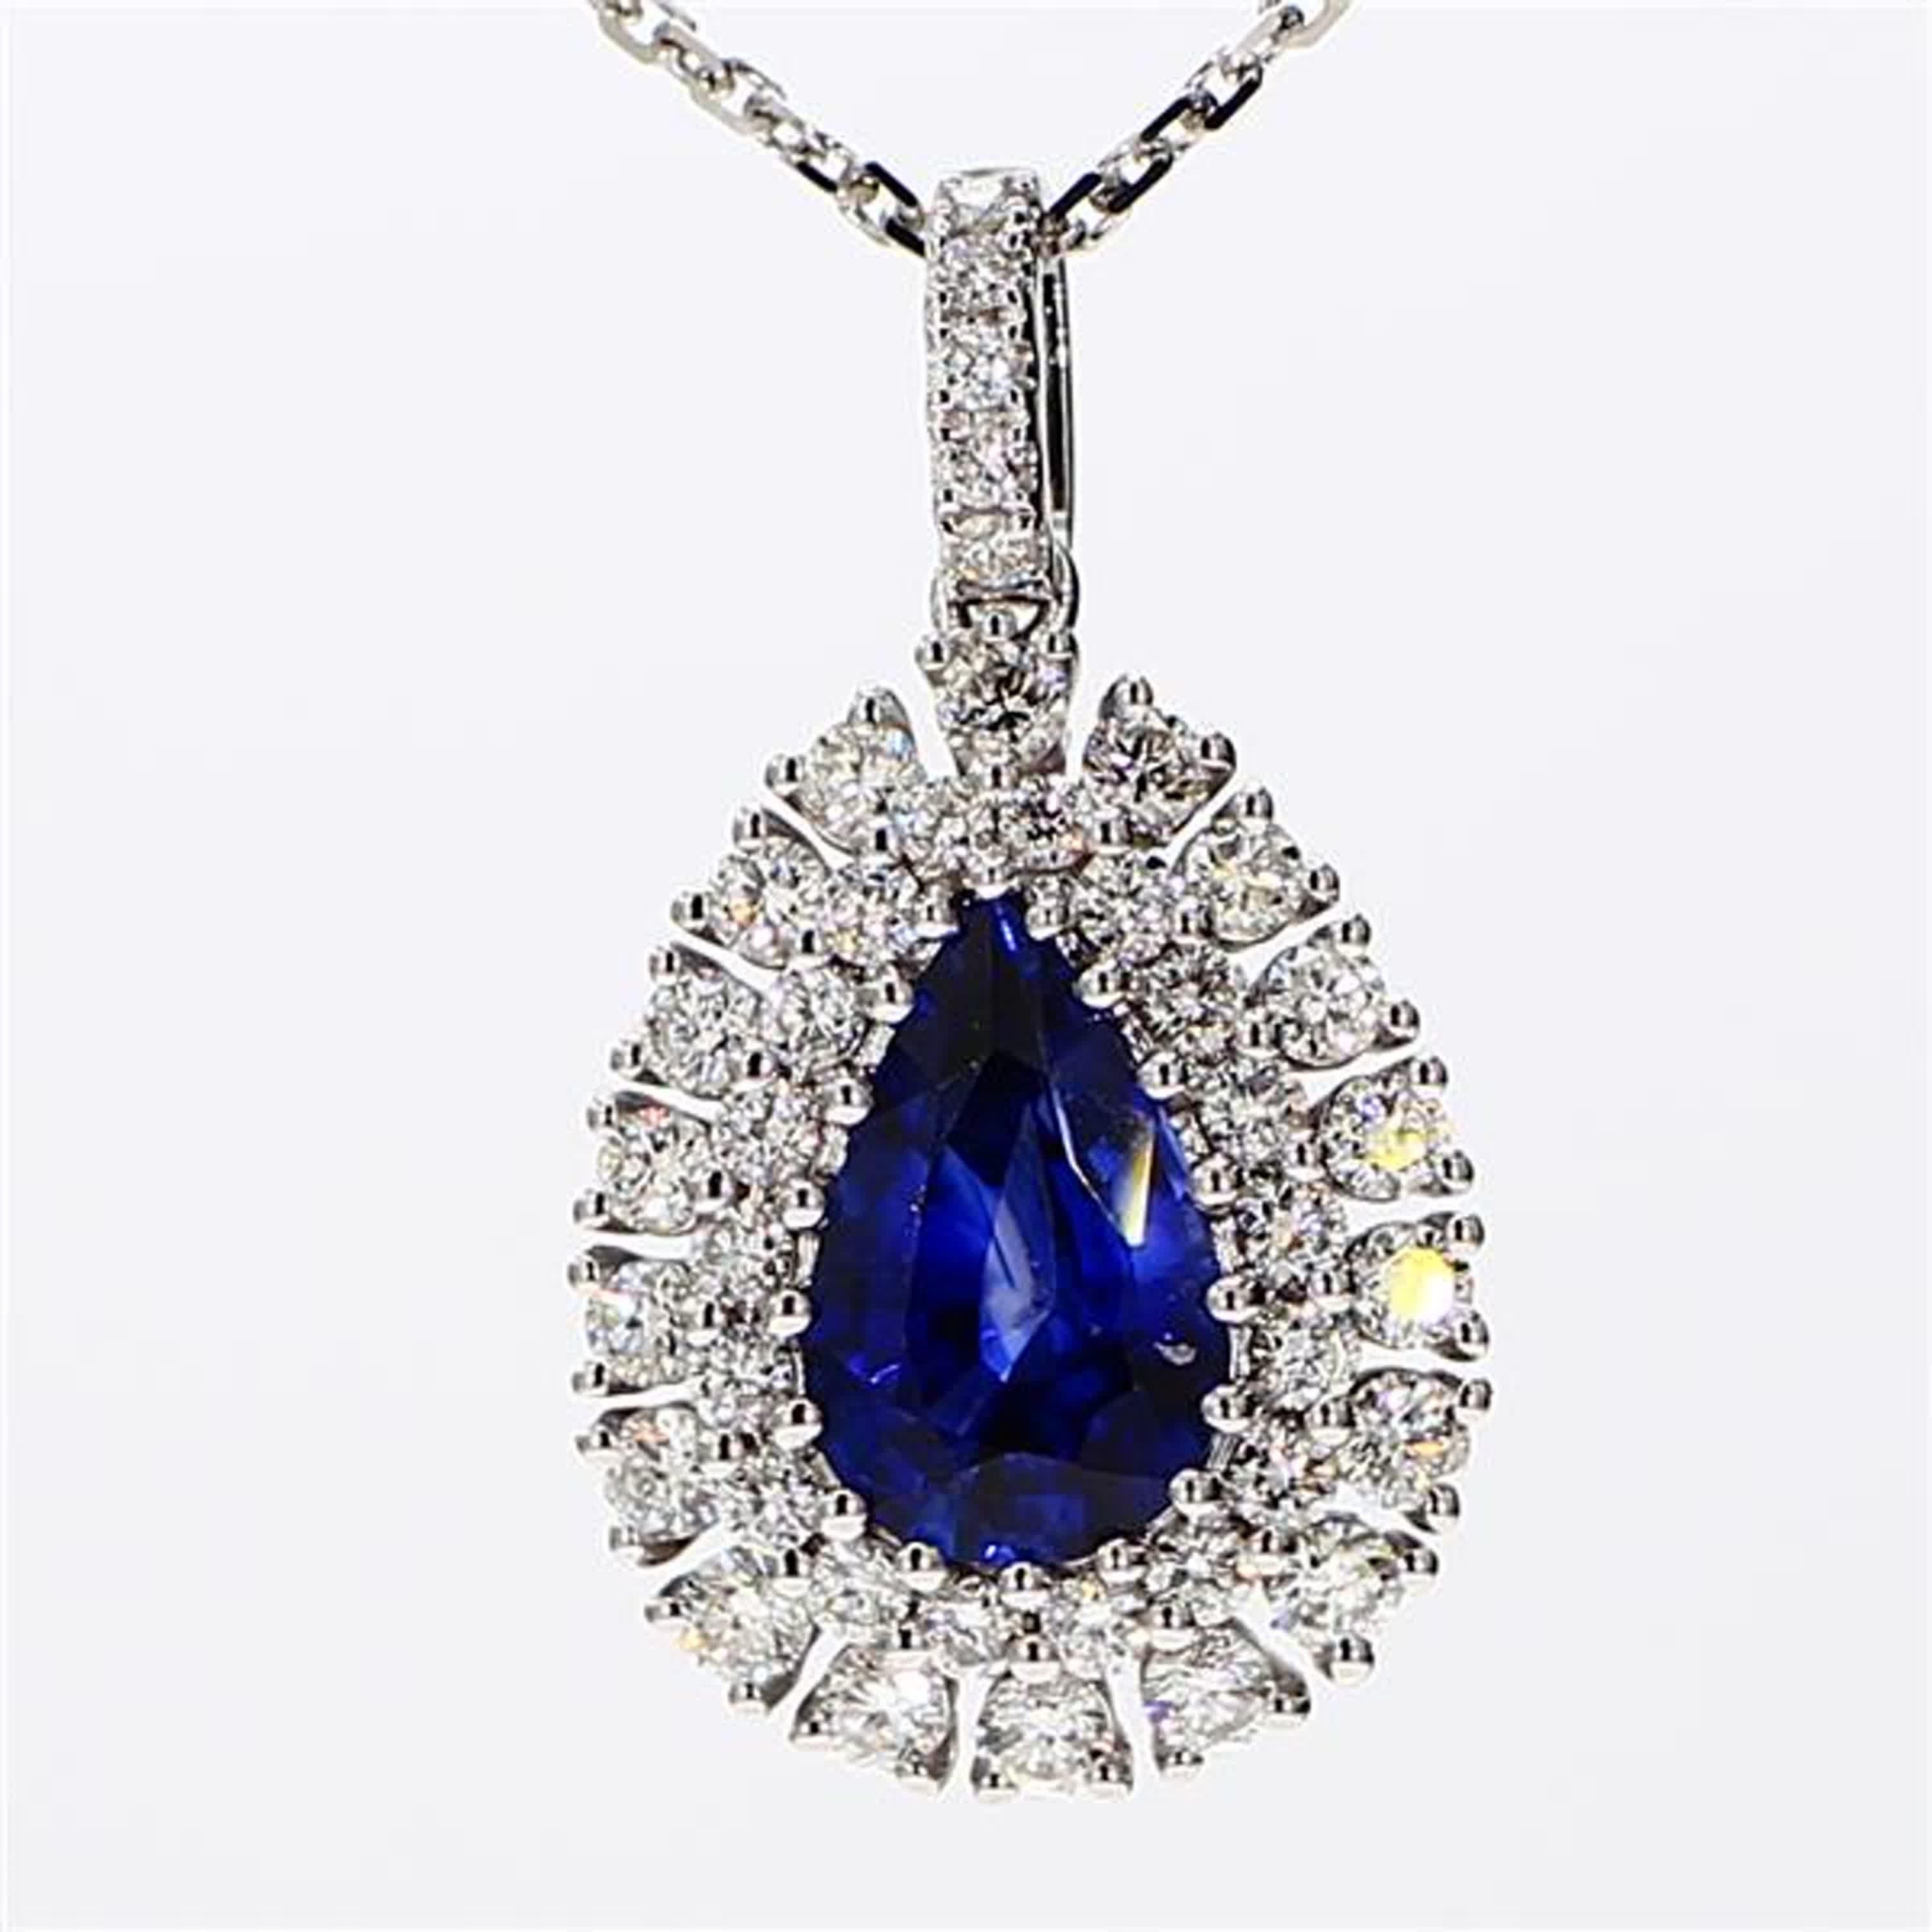 RareGemWorld's classic sapphire pendant. Mounted in a beautiful 18K White Gold setting with a natural pear cut blue sapphire. The sapphire is surrounded by natural round white diamond melee. This pendant is guaranteed to impress and enhance your